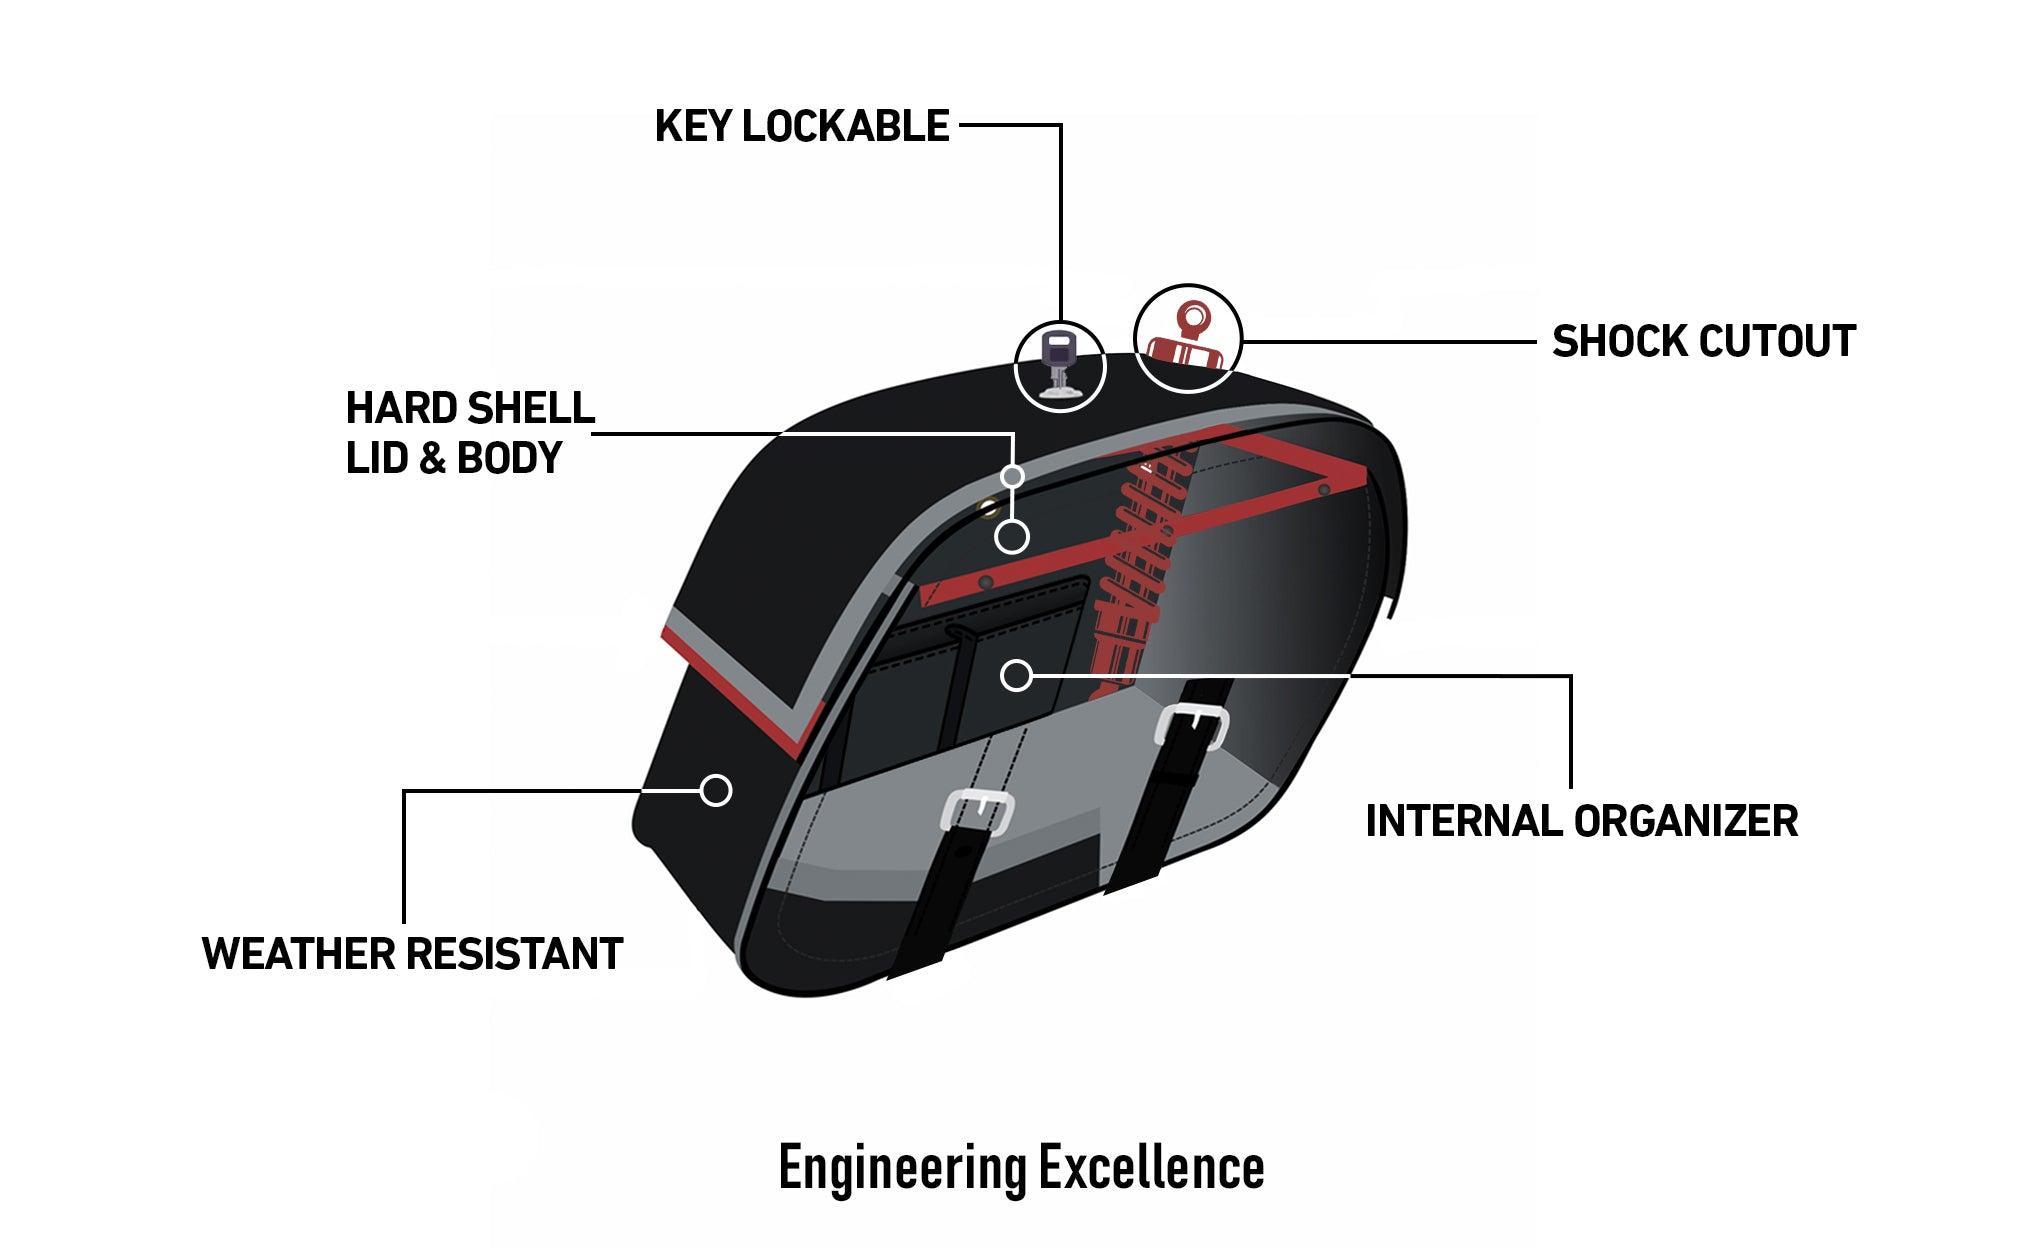 Viking Raven Extra Large Honda 1500 Valkyrie Standard Shock Cut Out Leather Motorcycle Saddlebags Engineering Excellence with Bag on Bike @expand